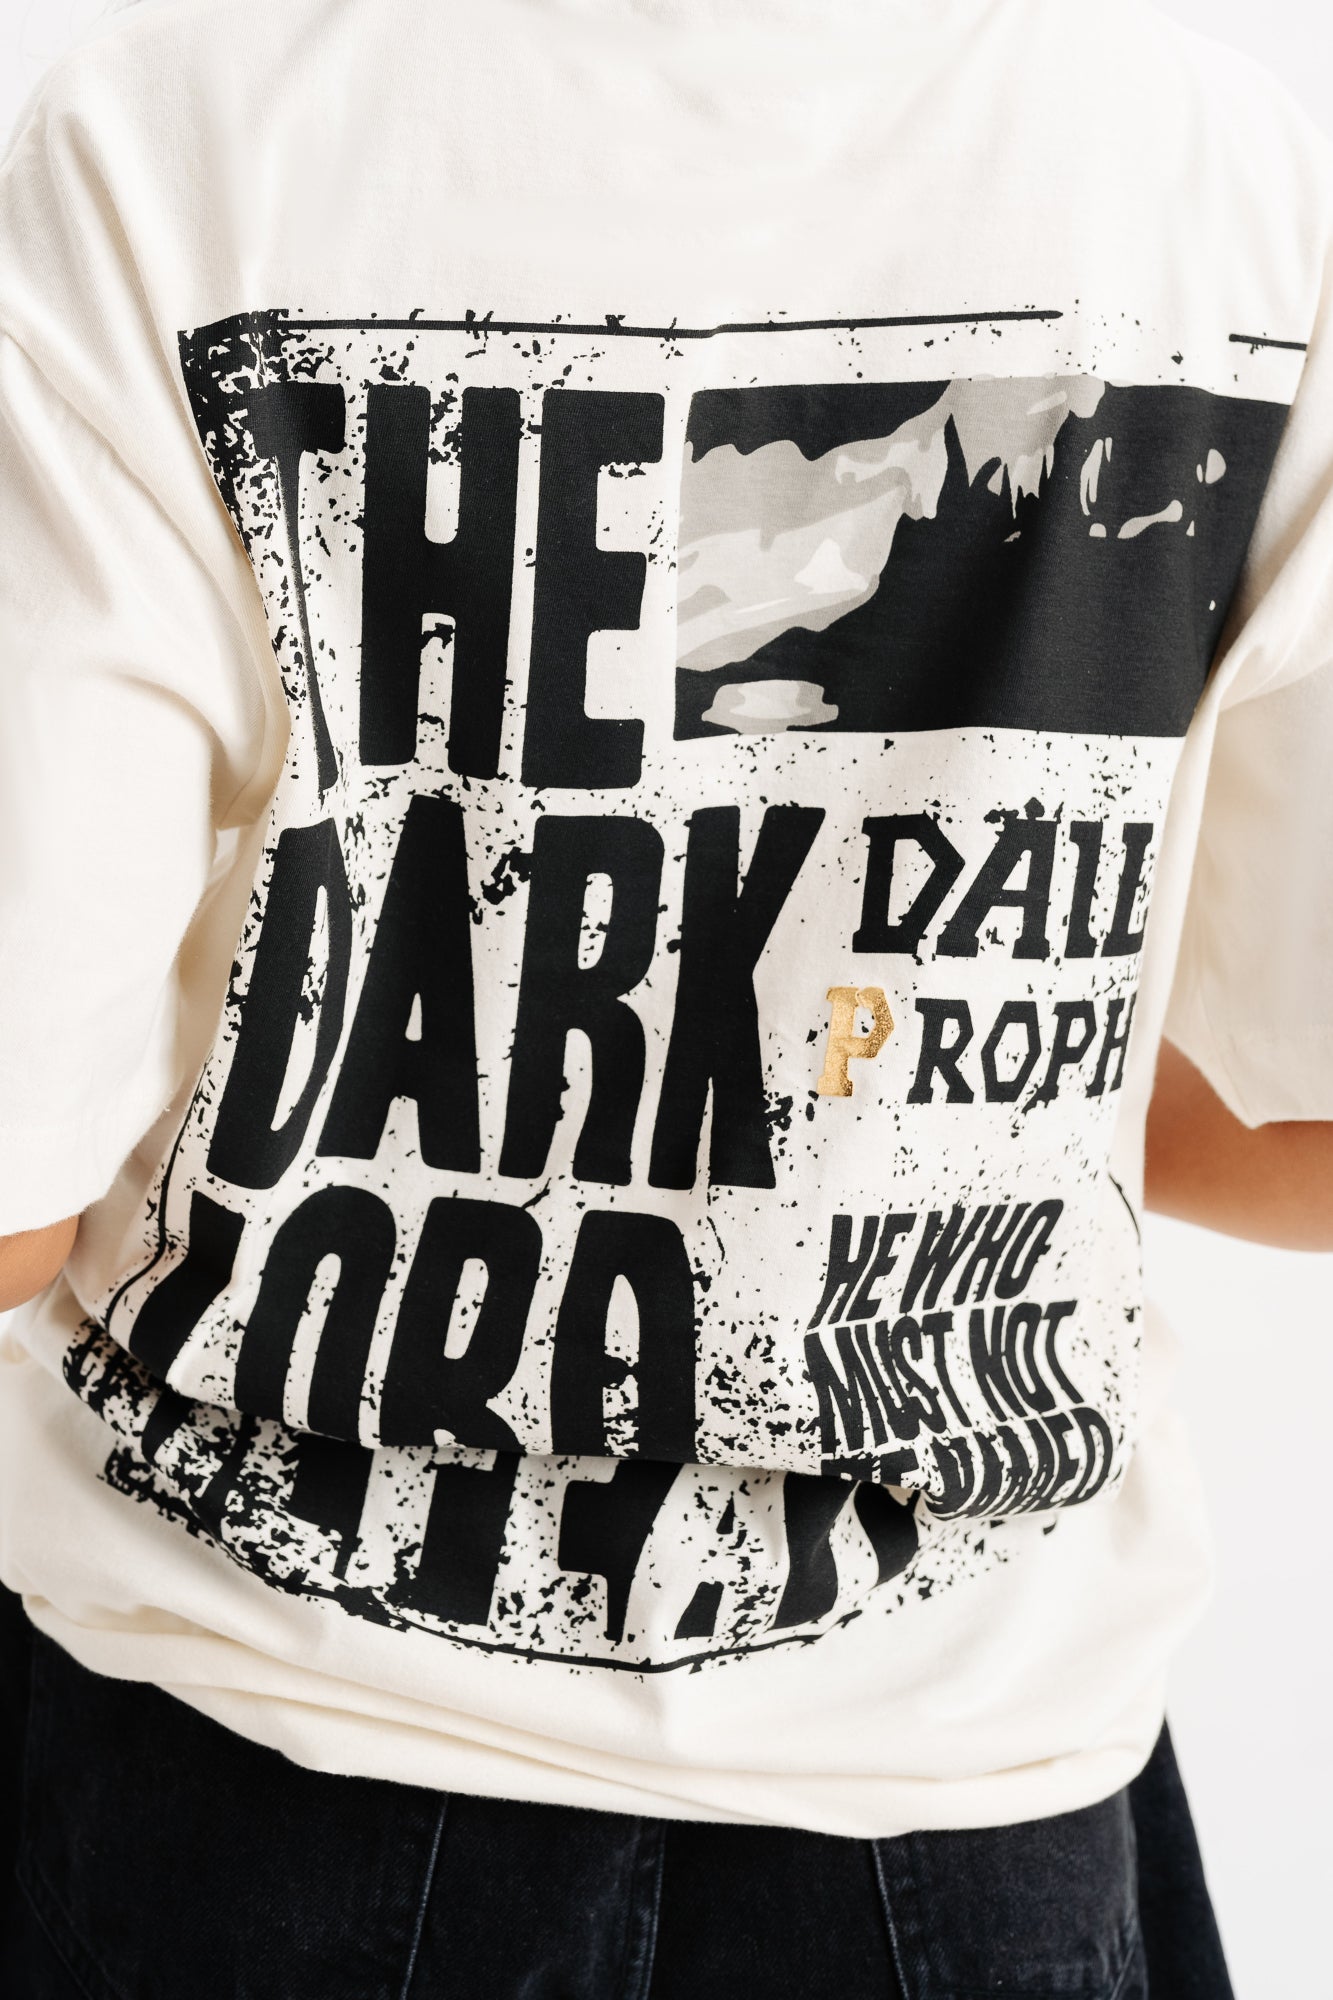 LORD VOLDEMORT OVERSIZED TEES